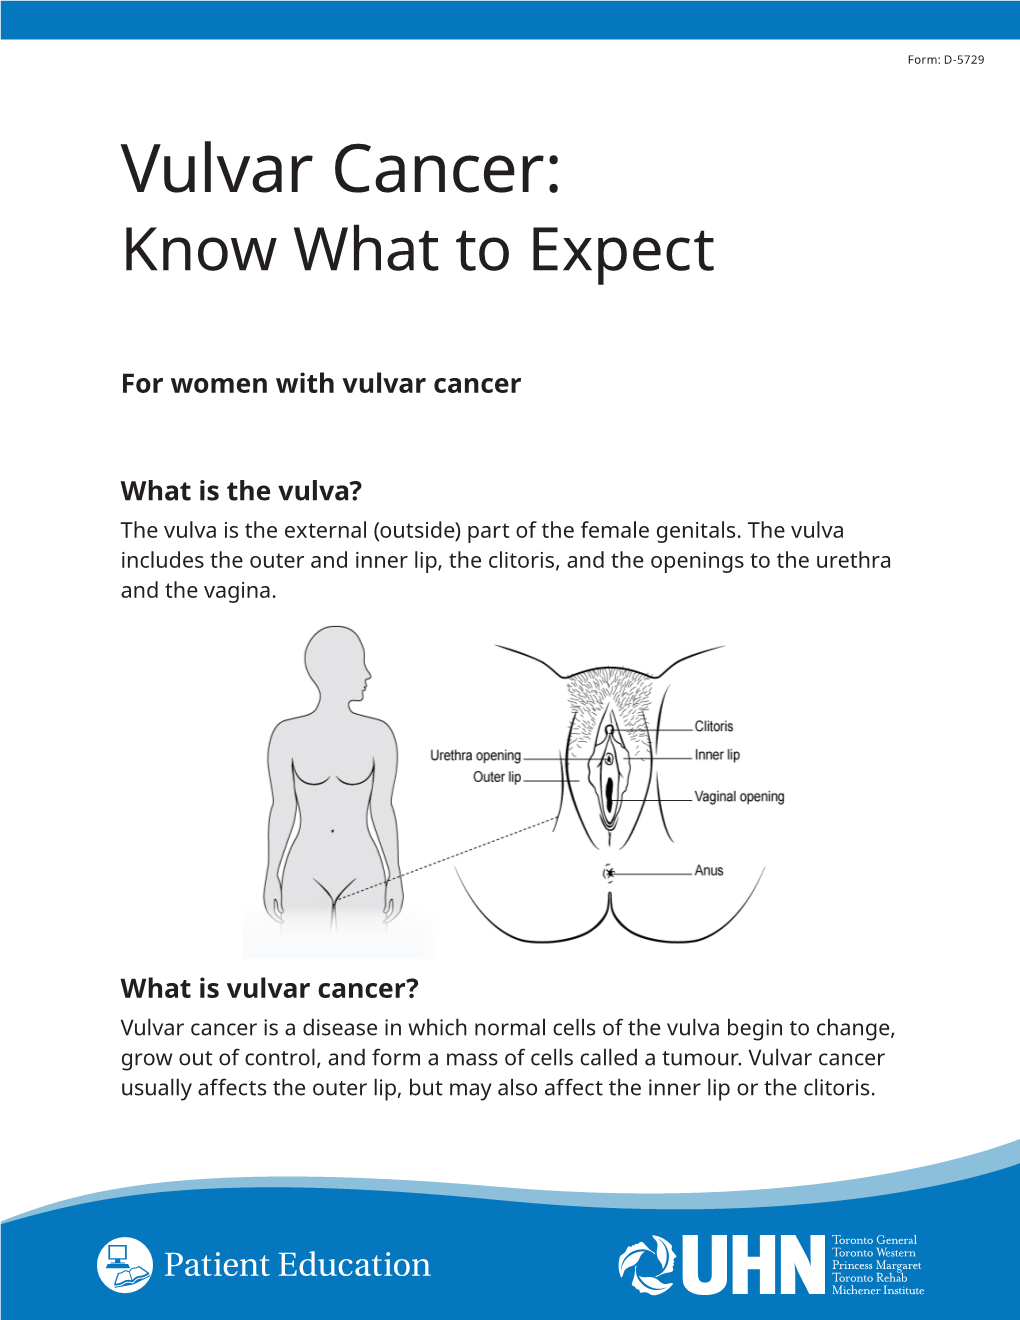 Vulvar Cancer: Know What to Expect